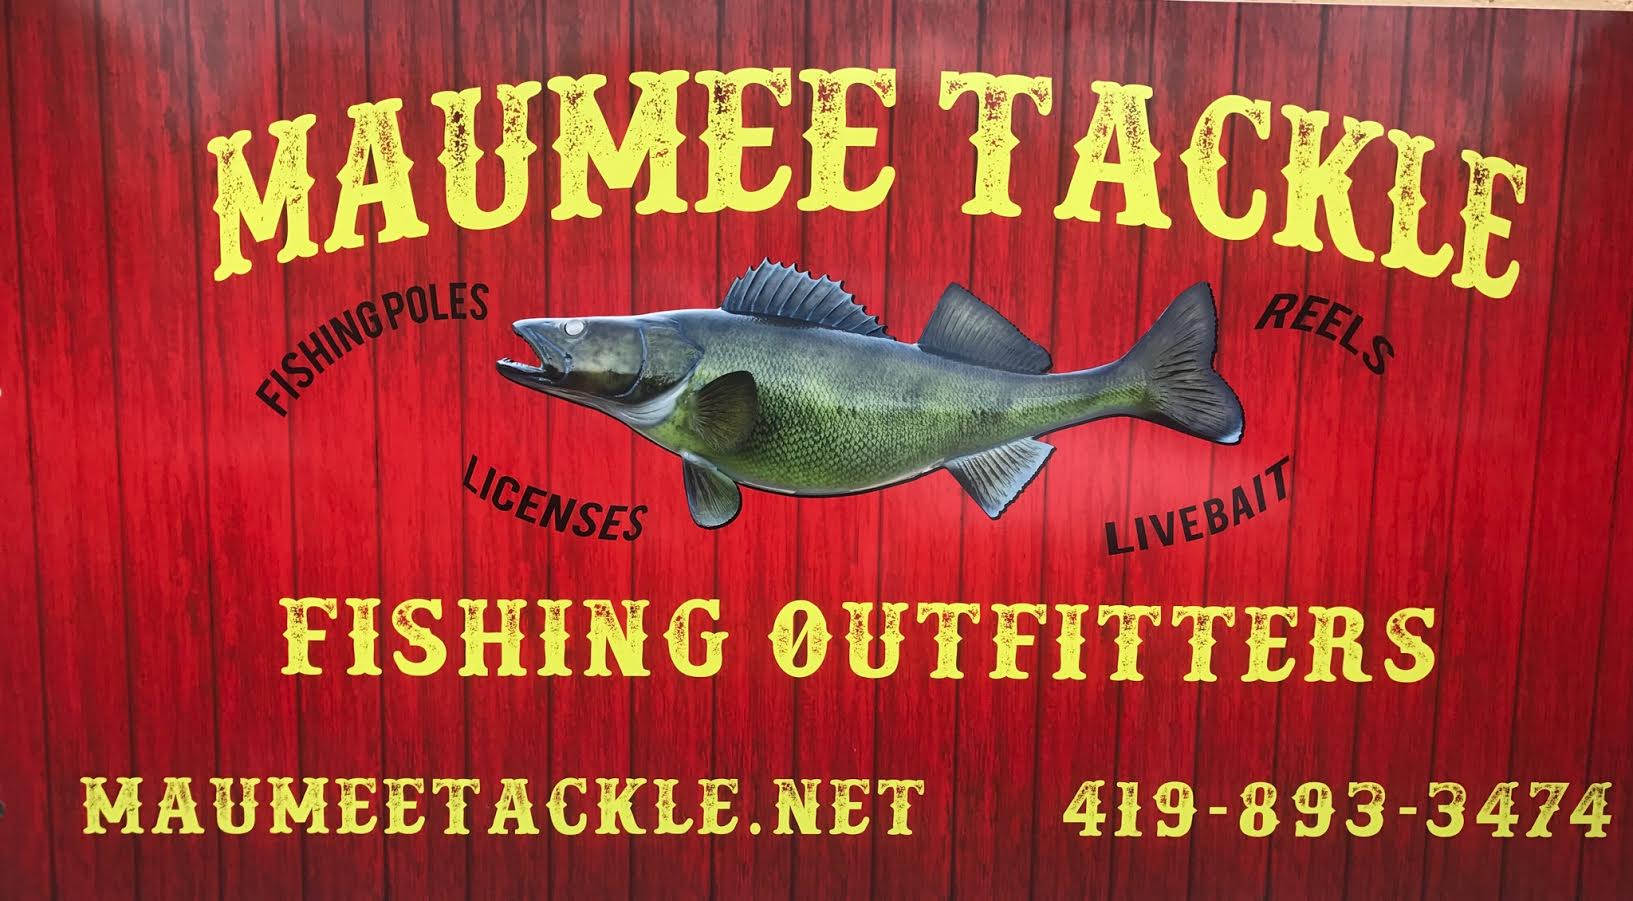 Thank you for joining us here at Maumee Tackle Fishing Outfitters! We are proud to announce our expansion into Firearm Sales!